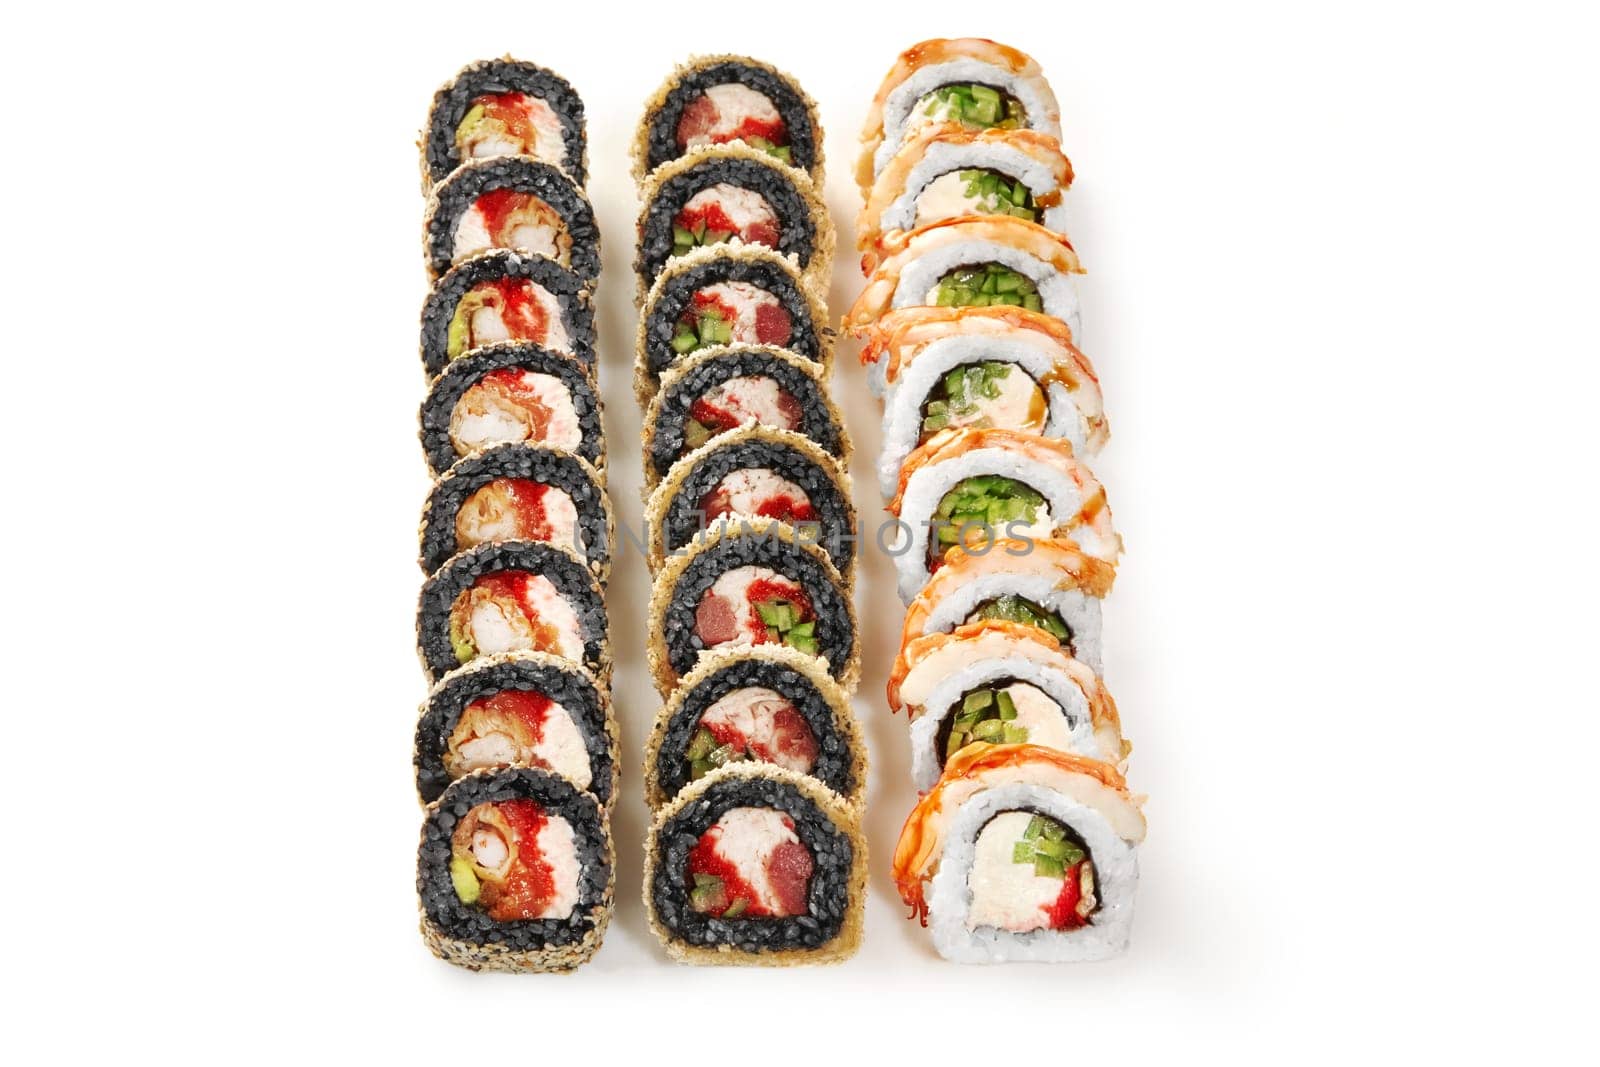 Delightful sushi trio: crunchy tempura rolls with black rice, sesame coated uramaki with tender shrimp tempura, and classic sushi rolls crowned with succulent prawn, arranged on white background